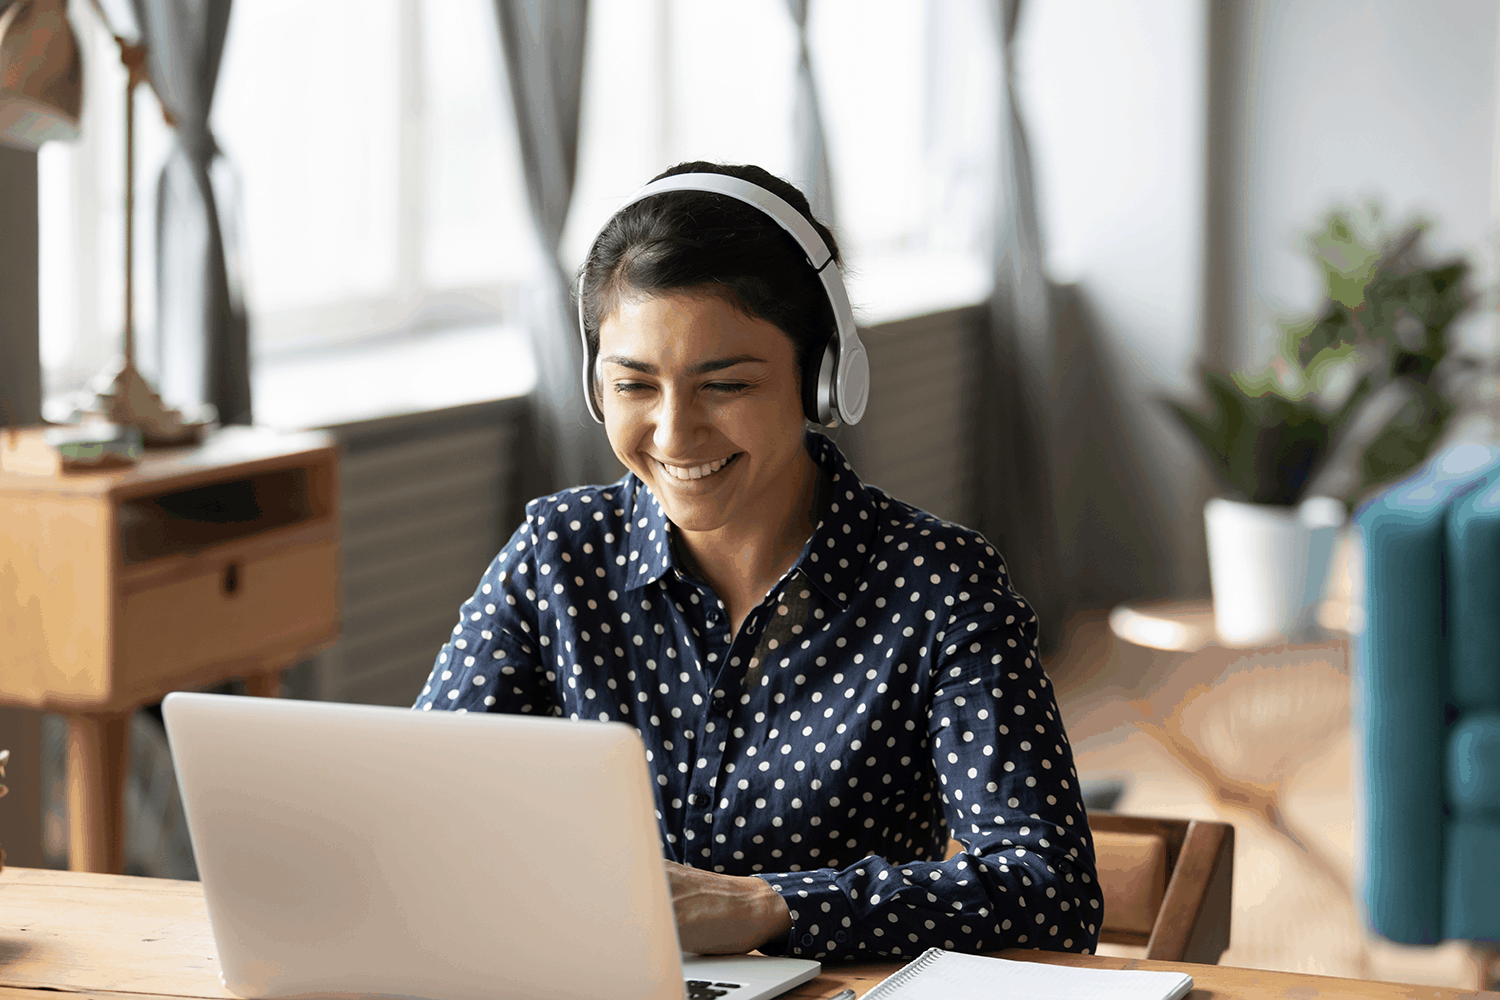 Woman wearing headphones working on a computer and smiling because she finds her IT career very fulfilling